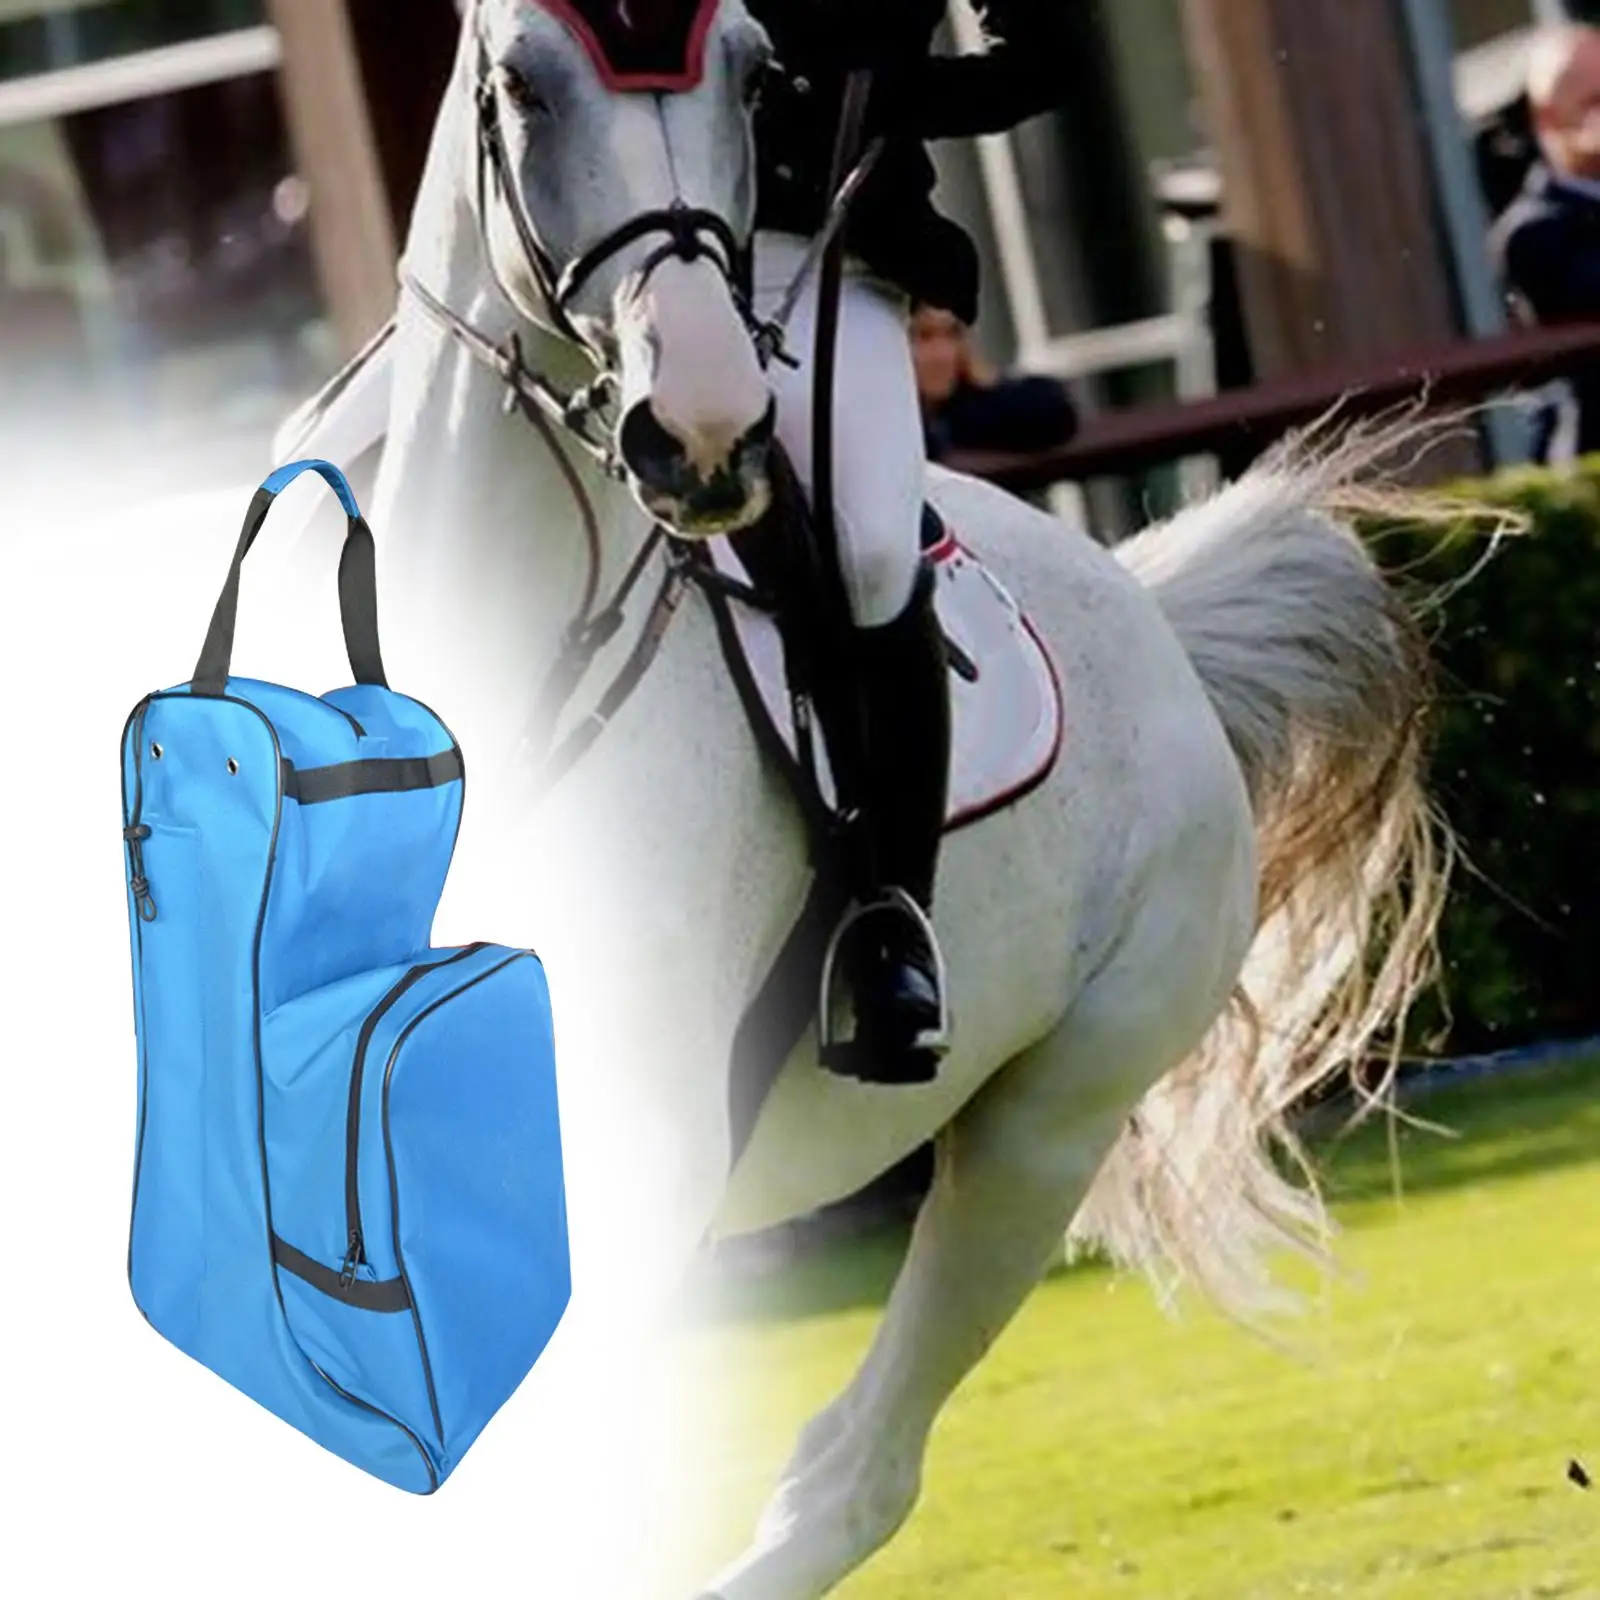 Equestrian Horse Riding Bag Boots Bag Sturdy Practical Waterproof with Compartment for Equipment Commonly Used by Riders